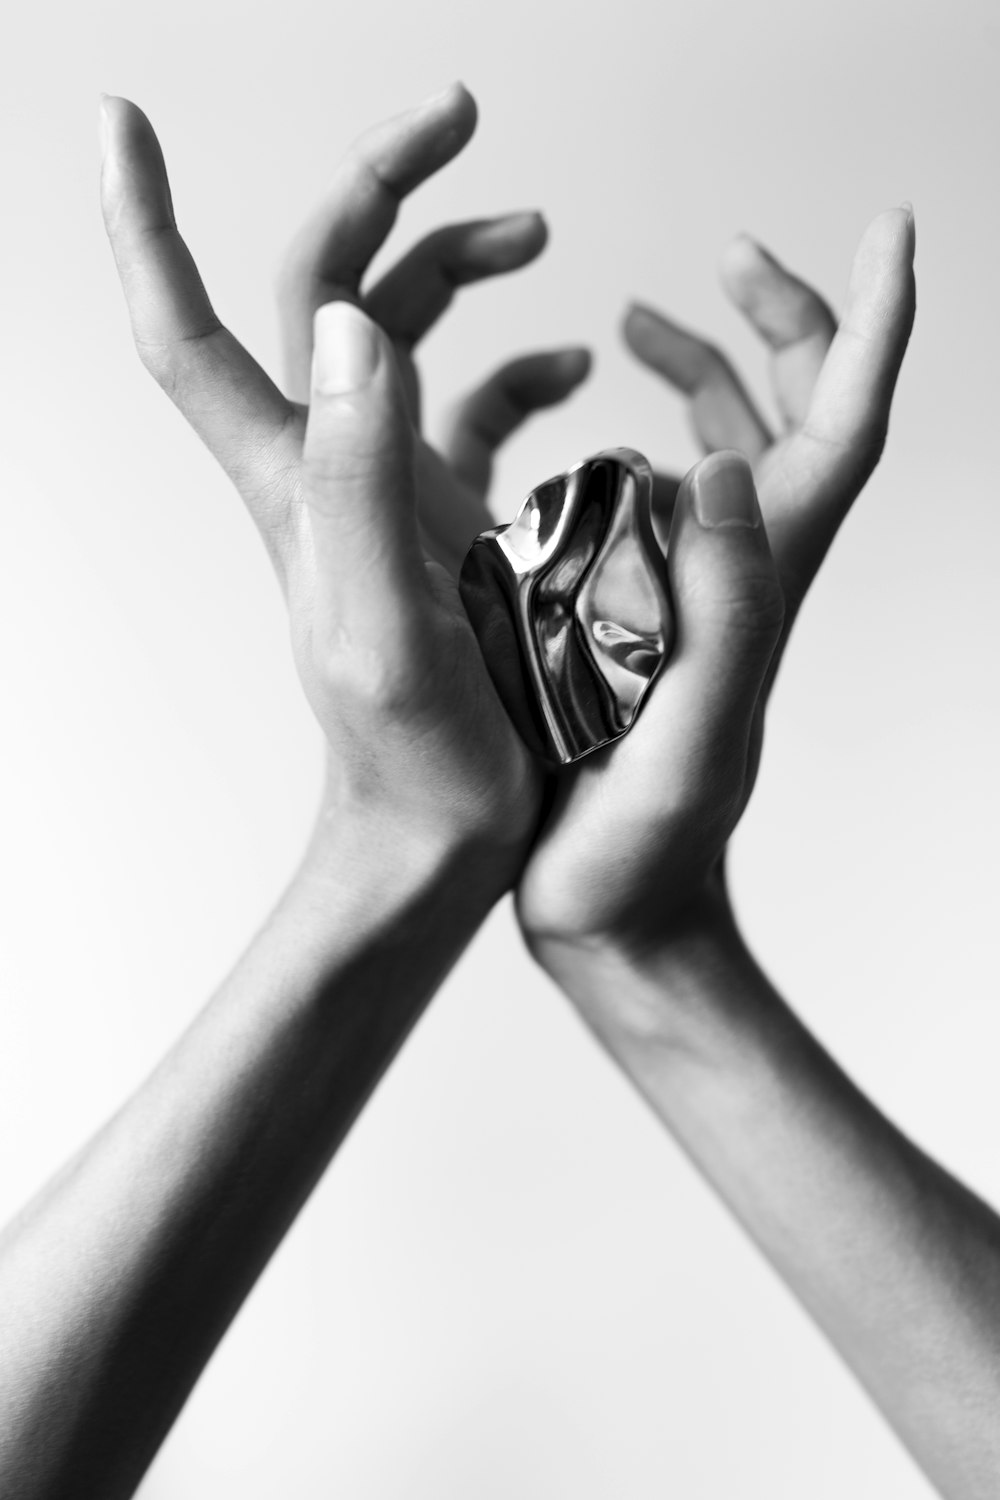 a pair of hands holding a silver object